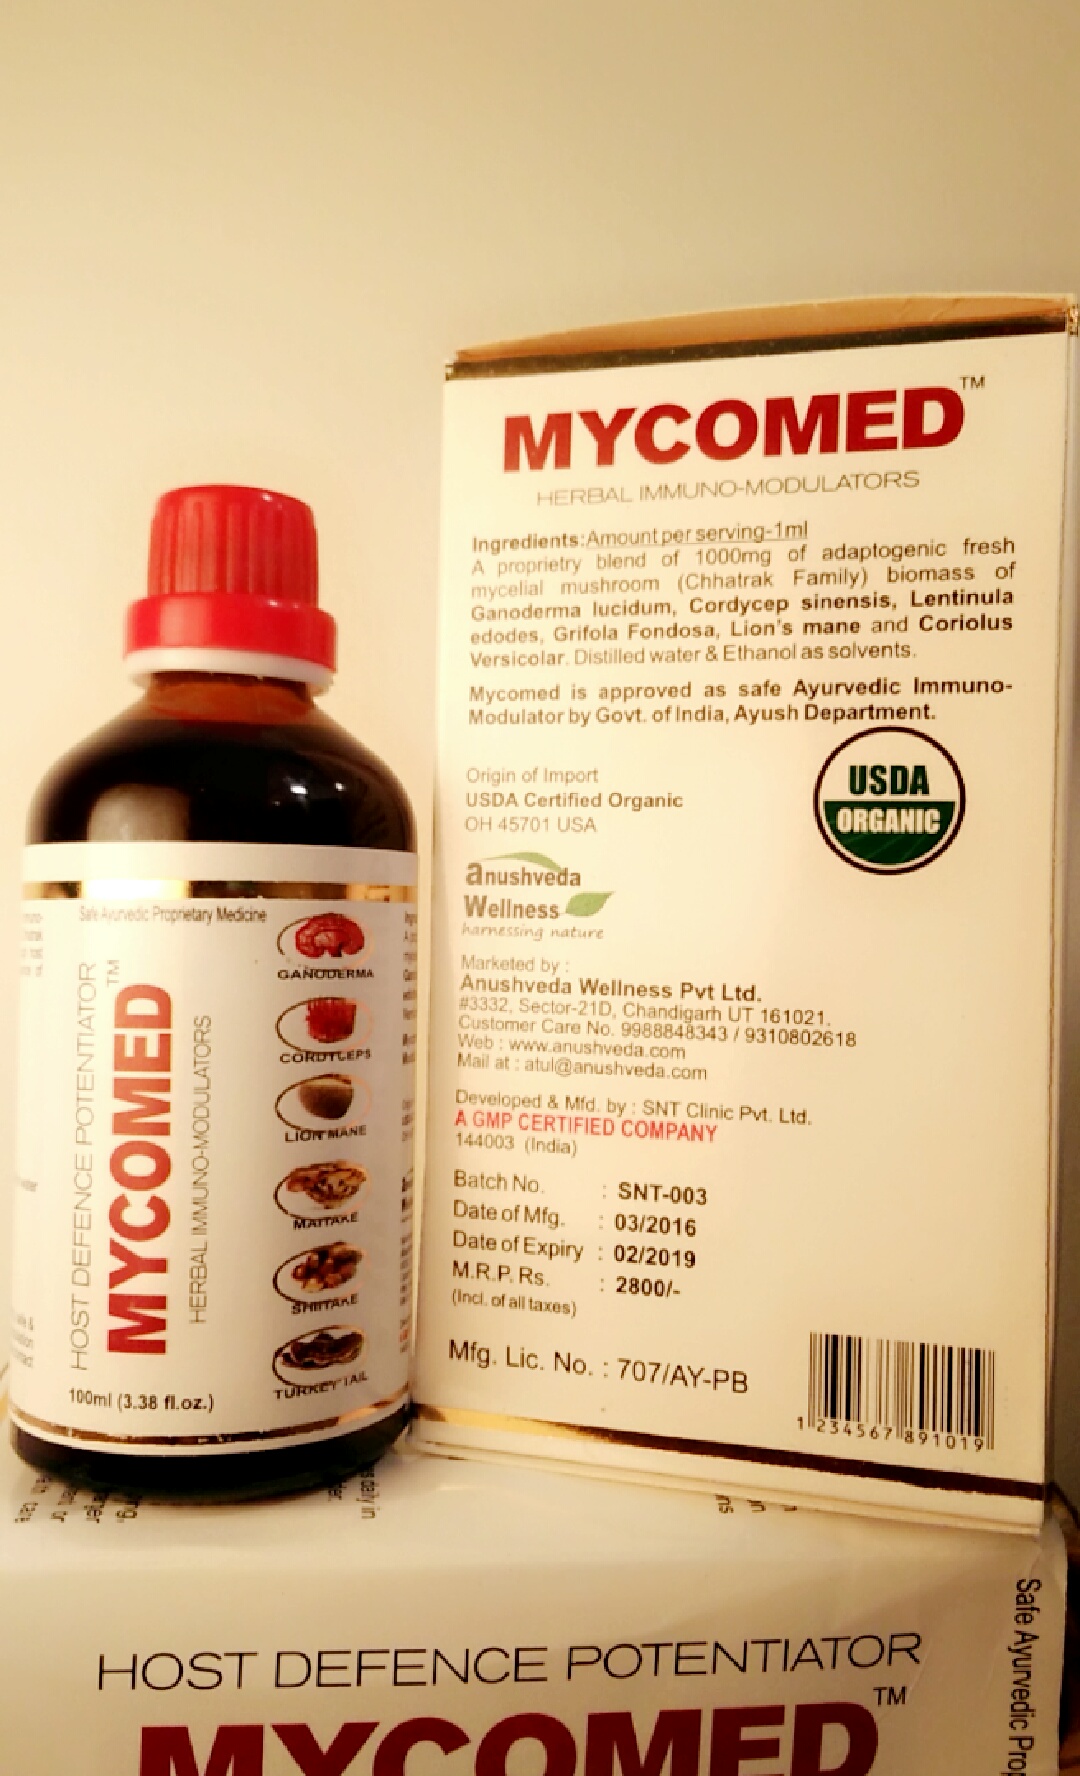 Mycomed